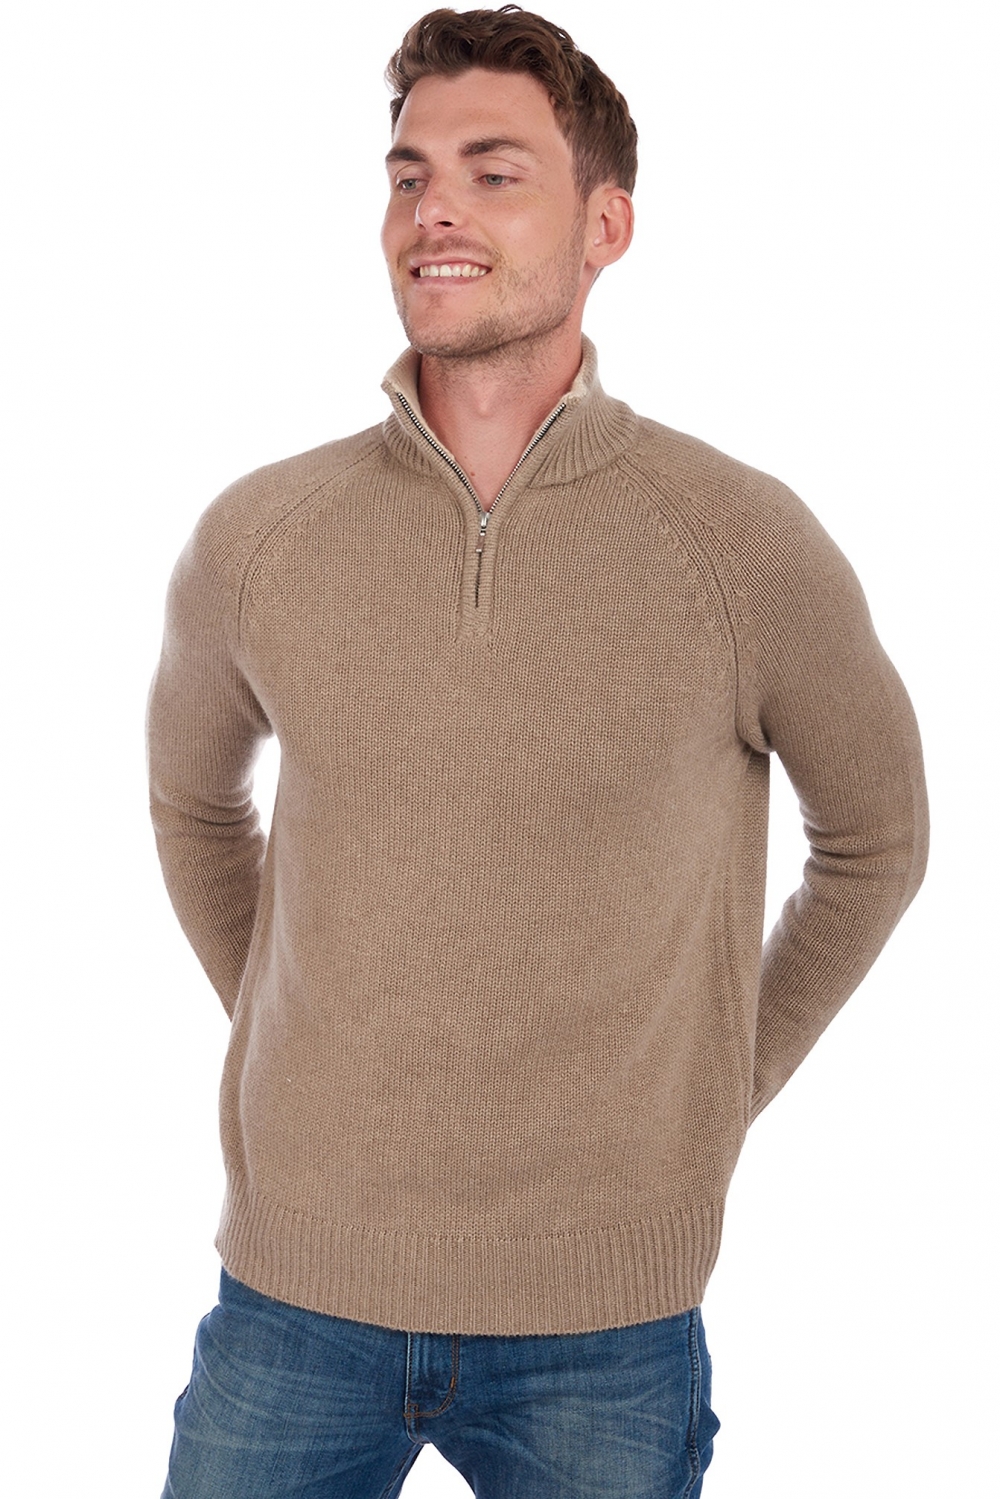 Cashmere uomo angers natural brown natural beige xl